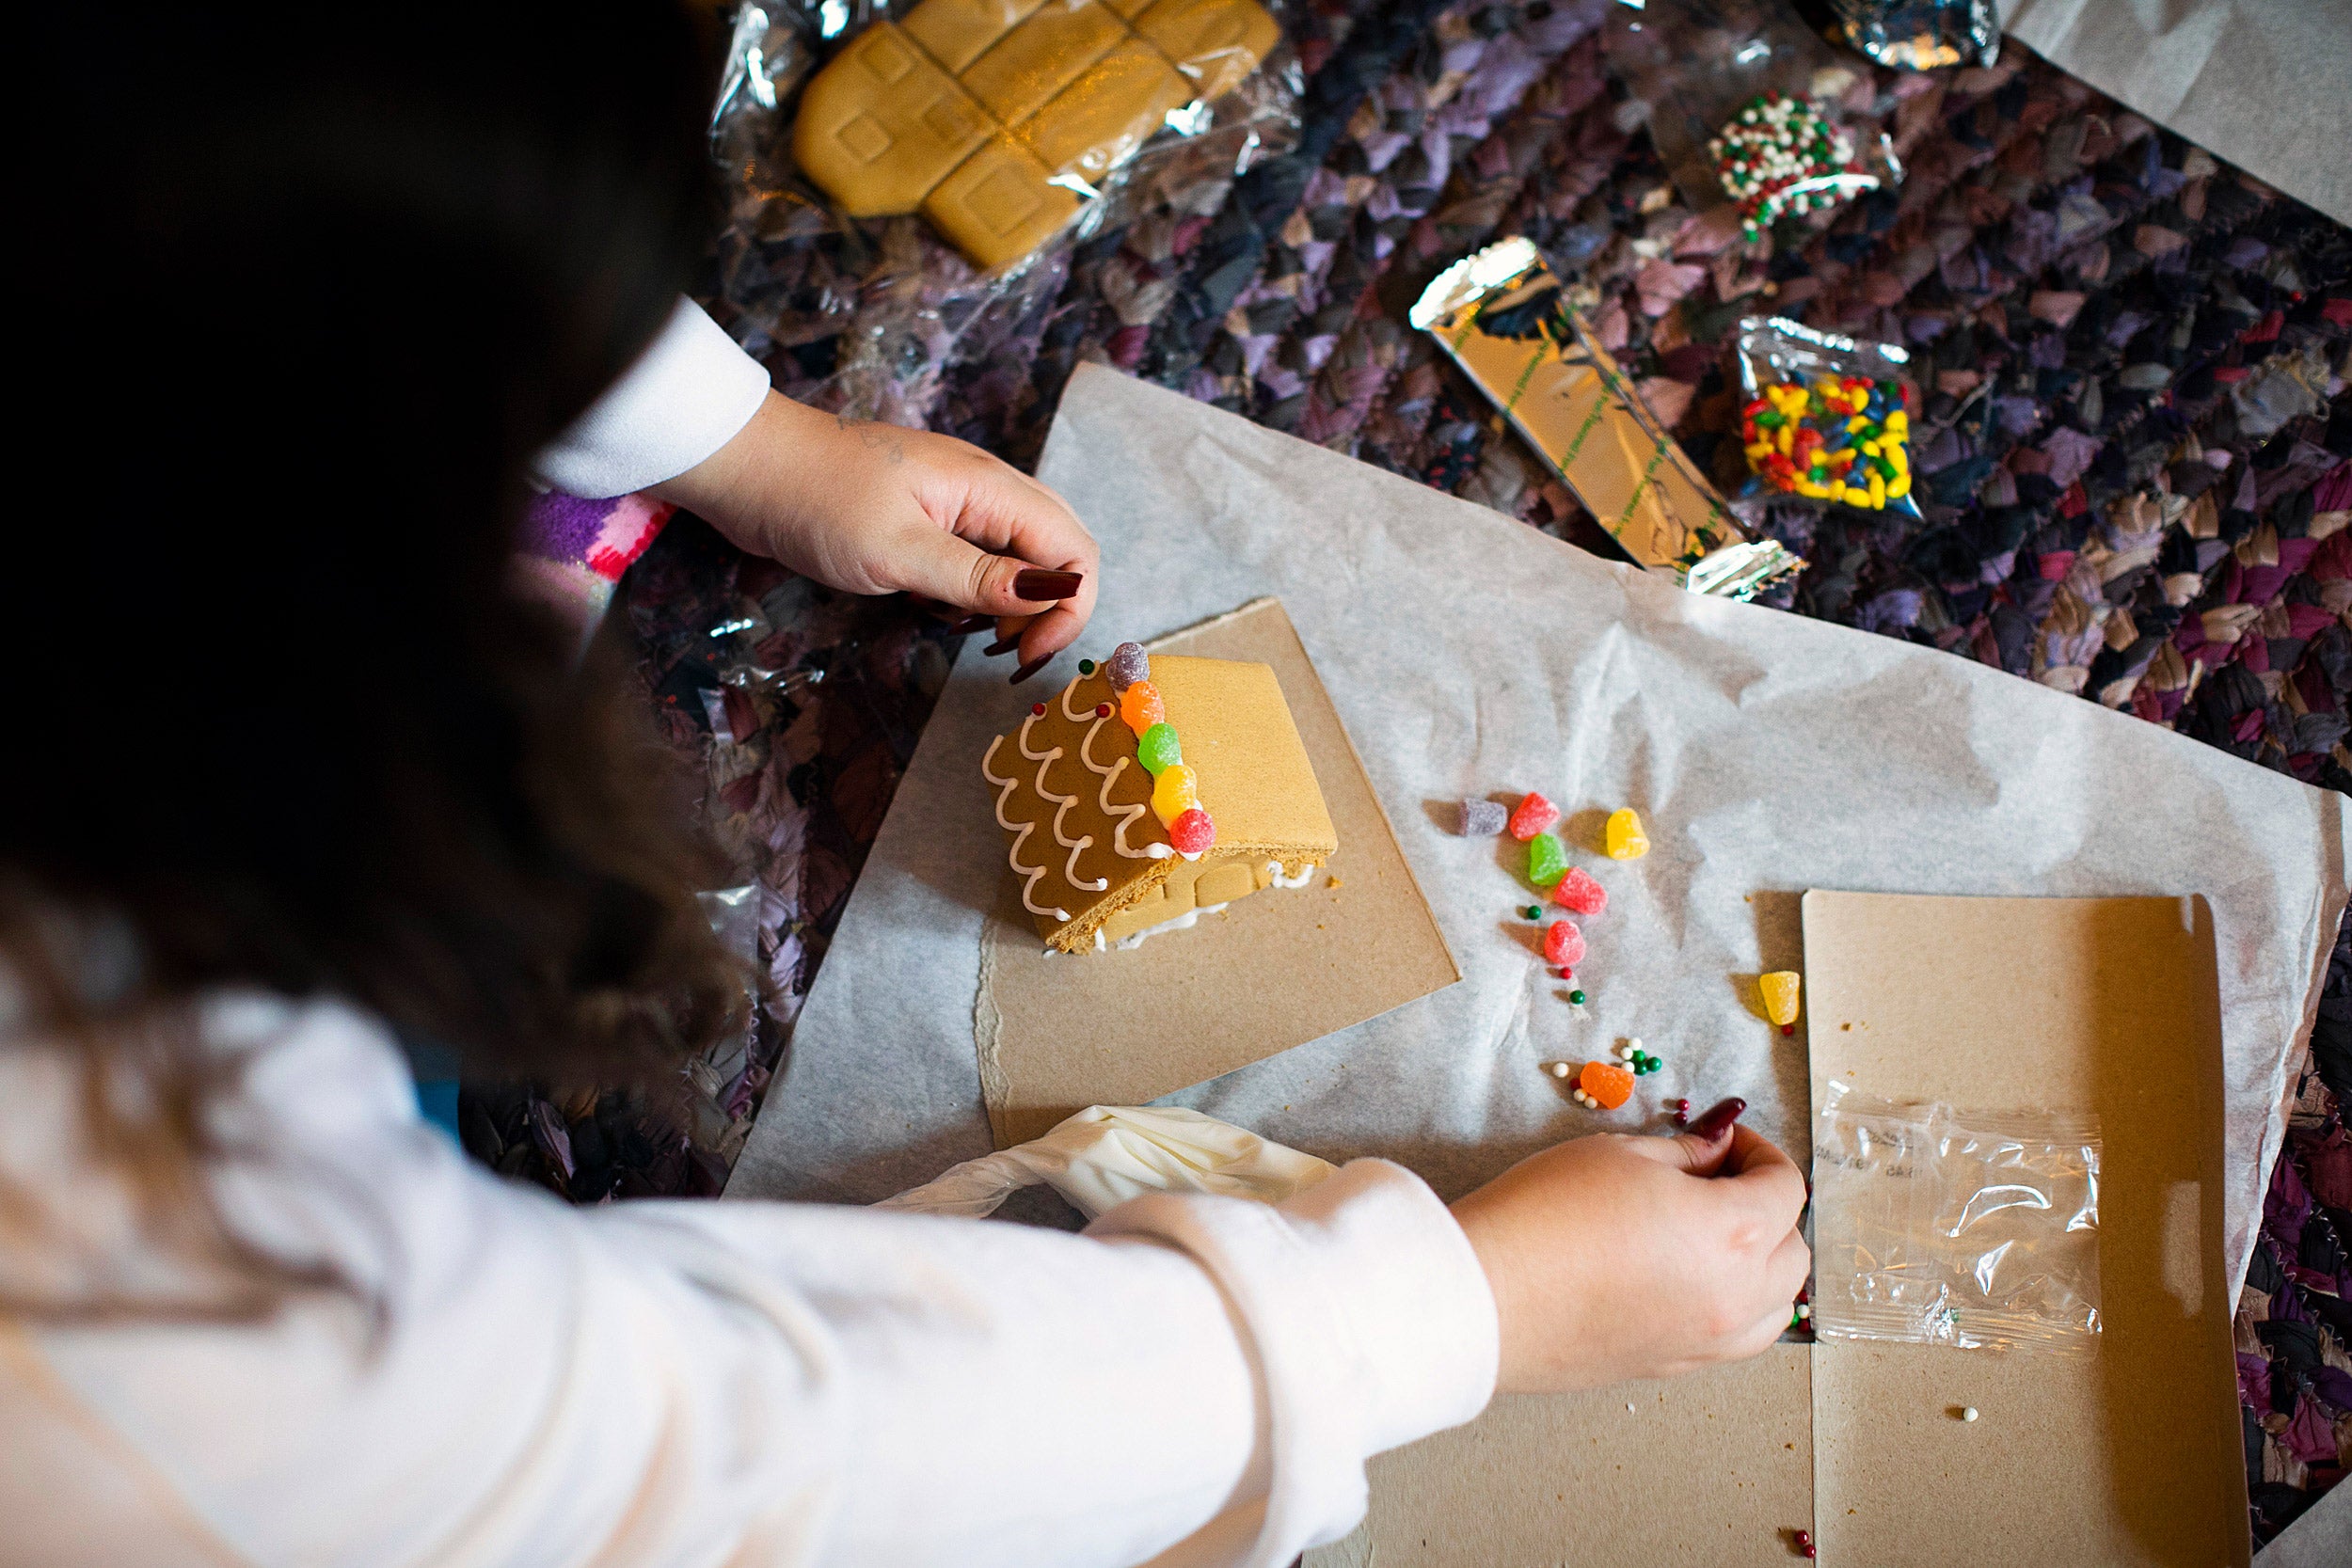 Decorating a gingerbread house.